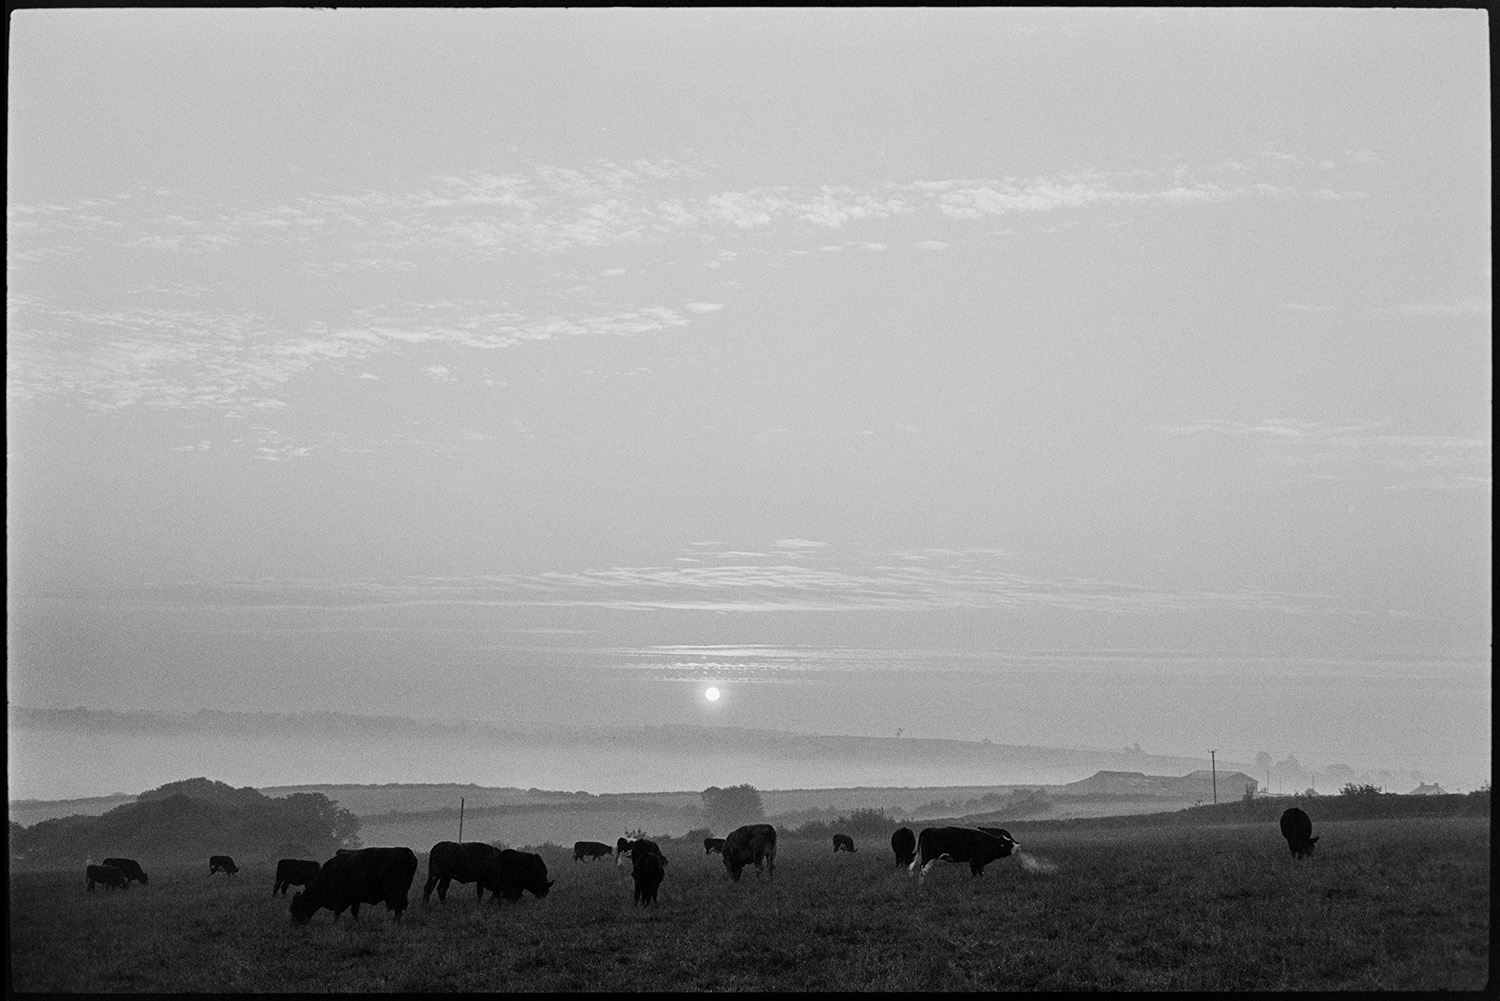 Early morning, rising sun with grazing cattle. 
[The sun rising above a landscape with cattle grazing in a field at Huish.]